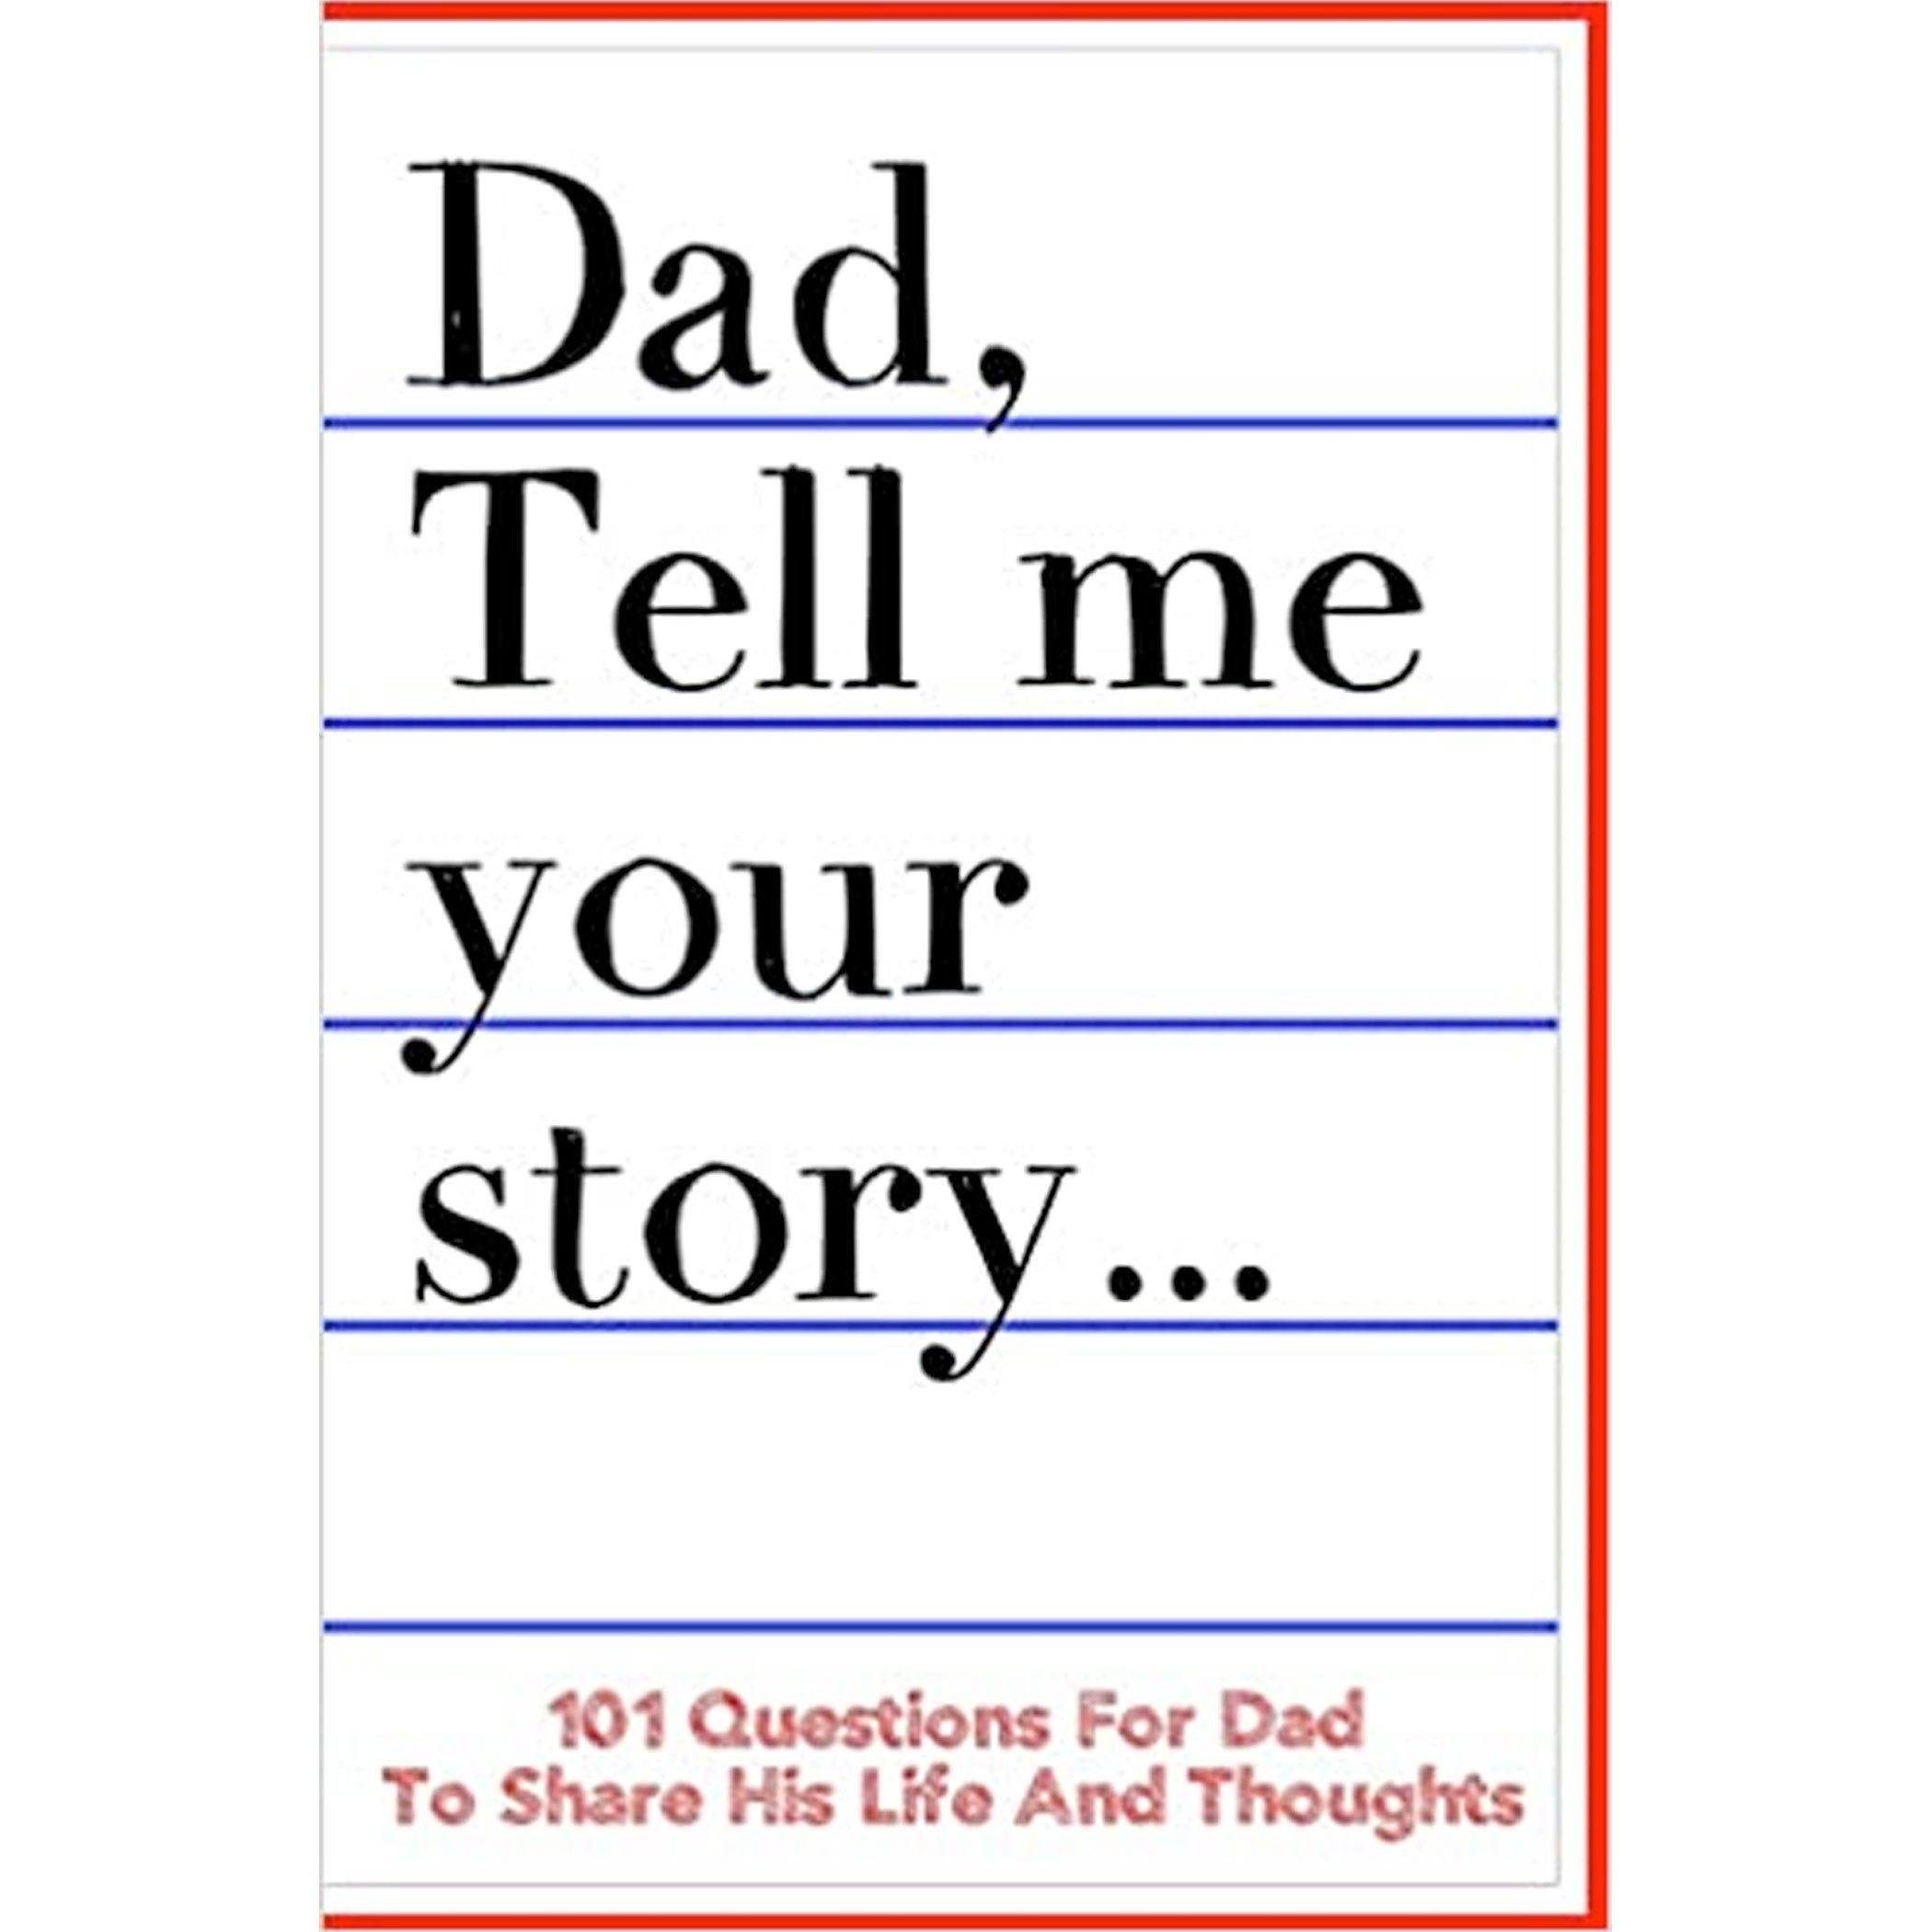 Dad Tell Me Your Story cover